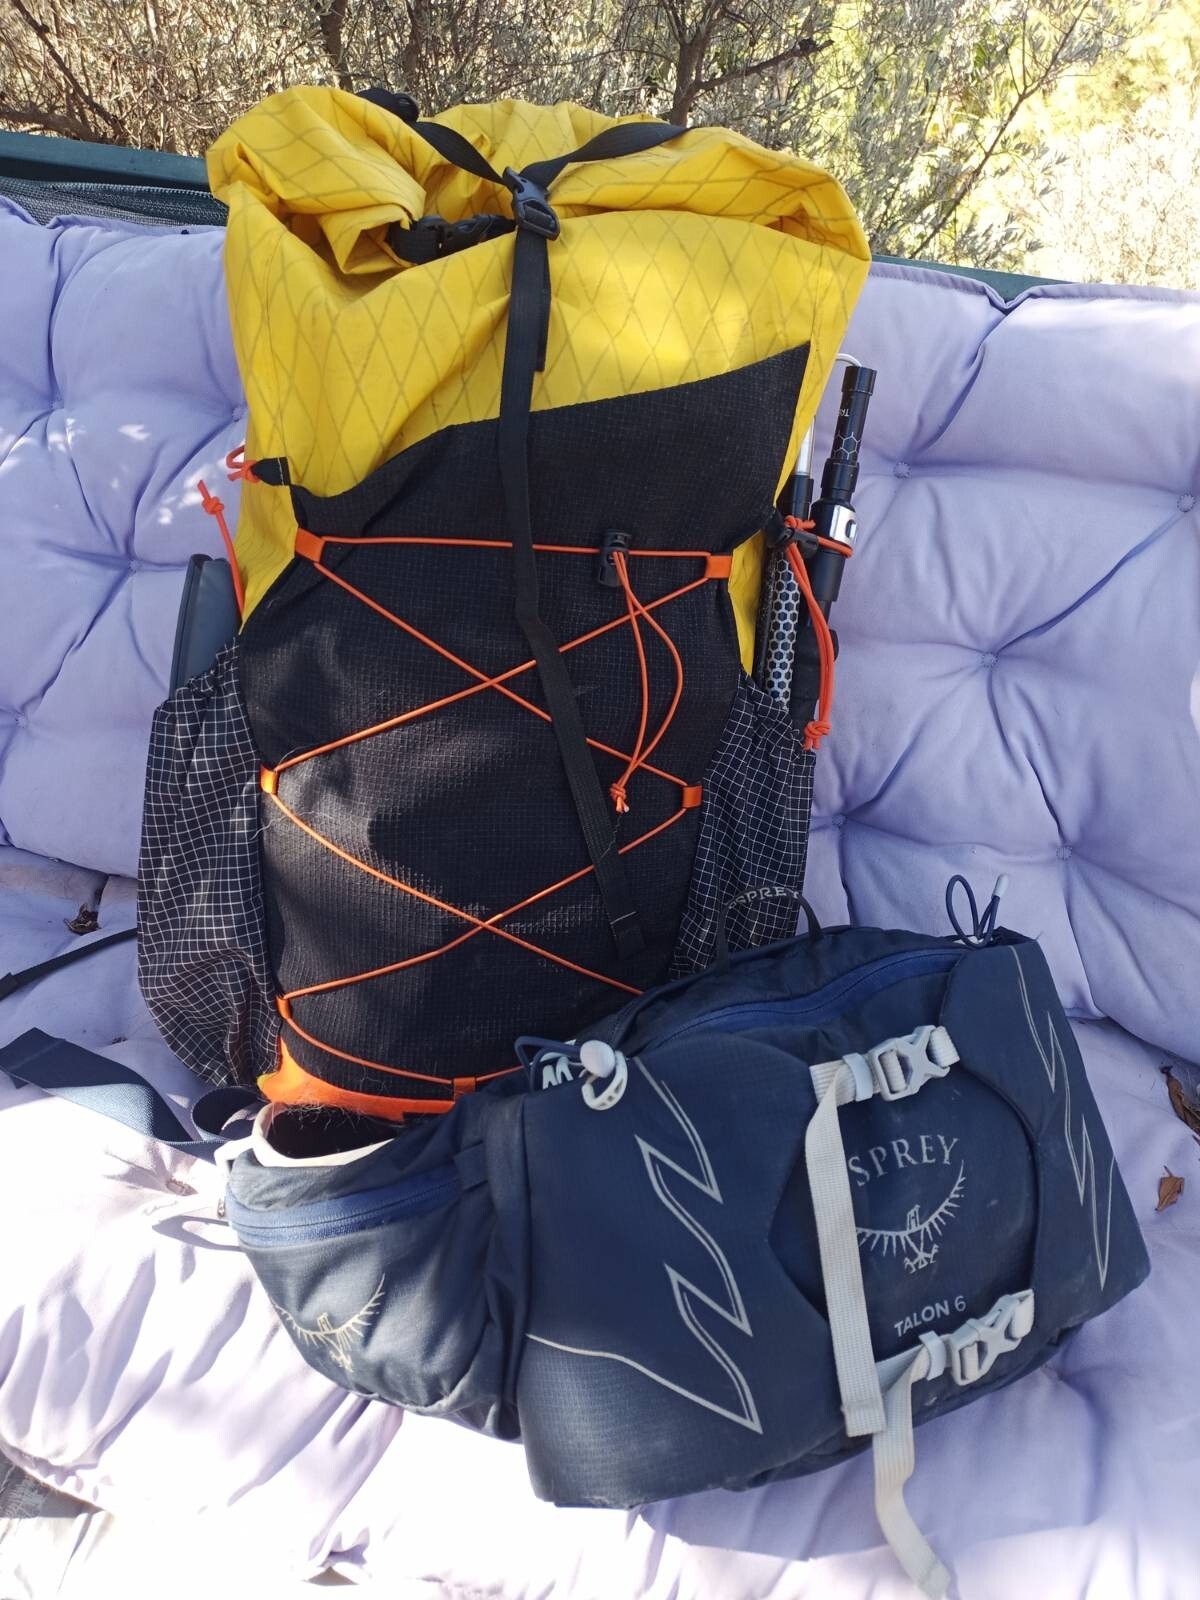 A yellow and black Atom pack rucksack sits next to a blue Osprey waist pack